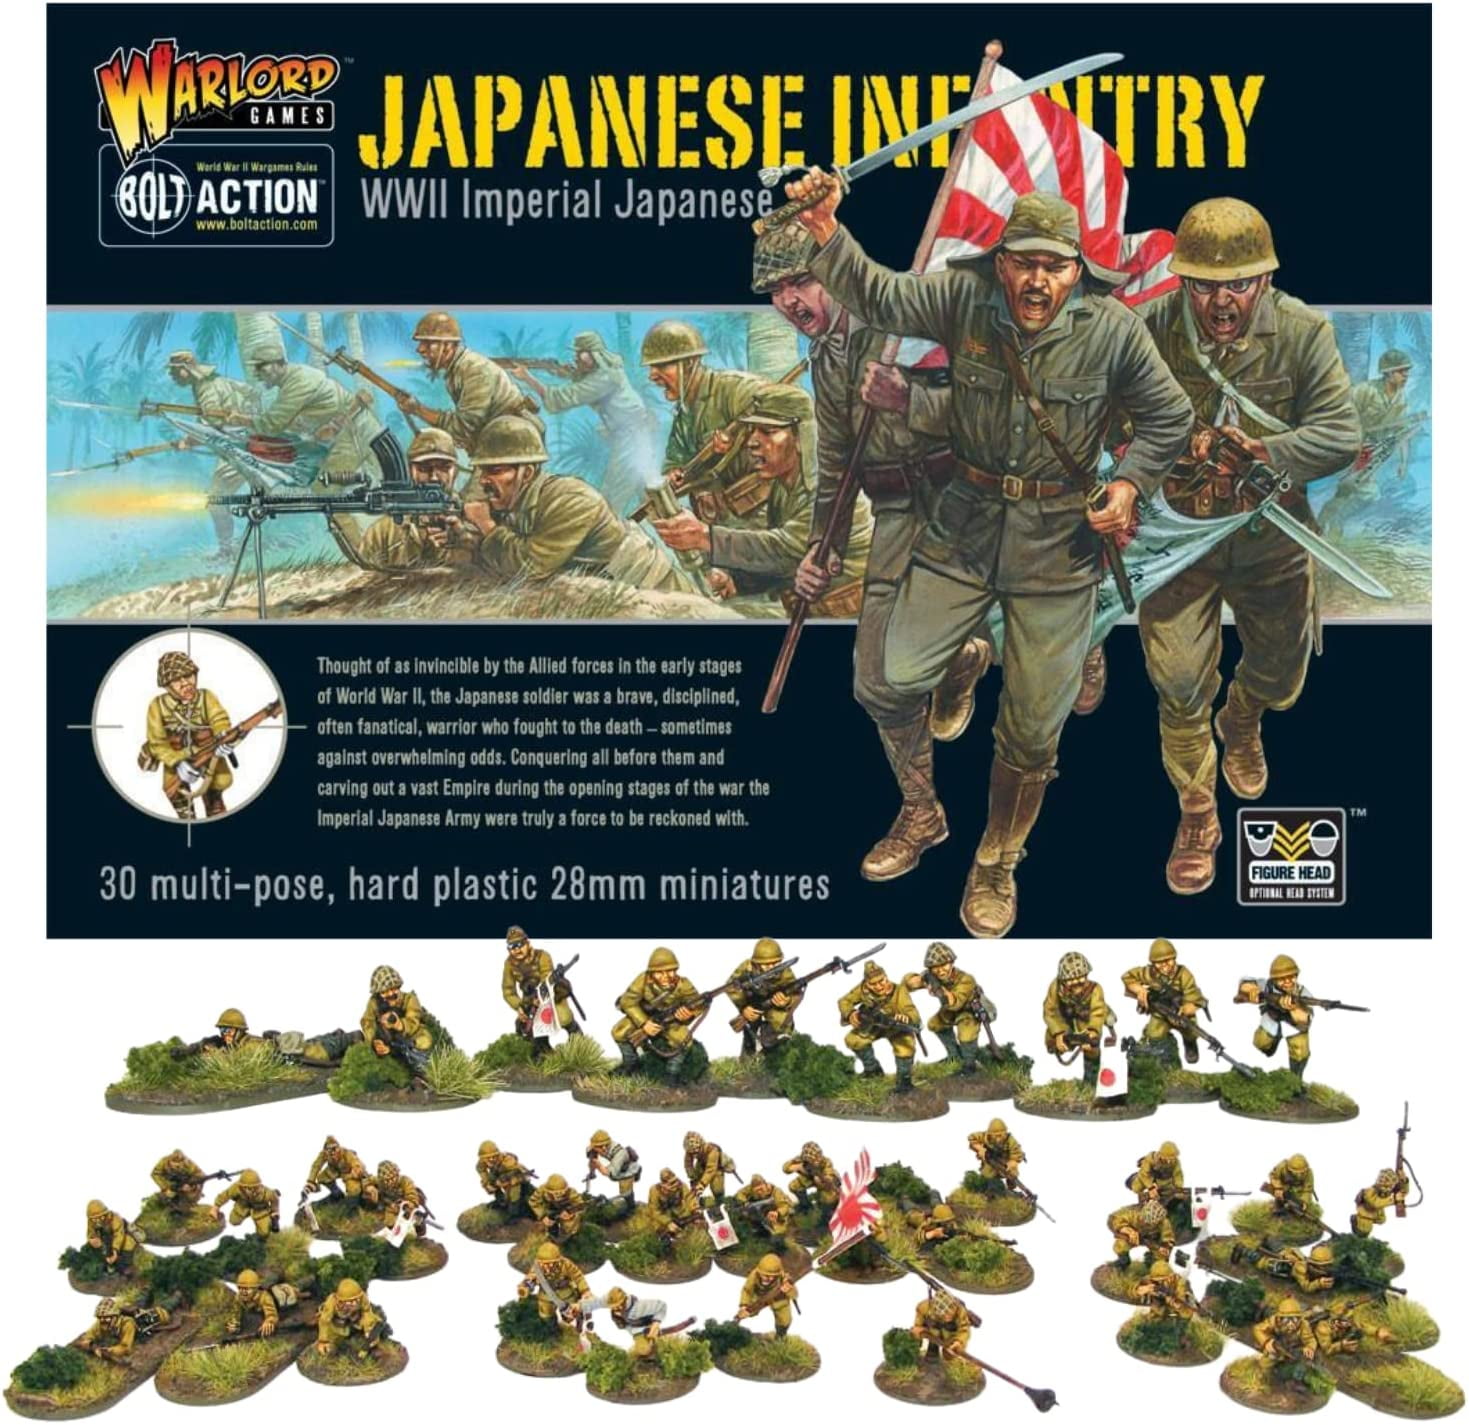 Marines Infantry for Japan WW2 image - Fierce War mod for Rise of Nations:  Thrones and Patriots - Mod DB